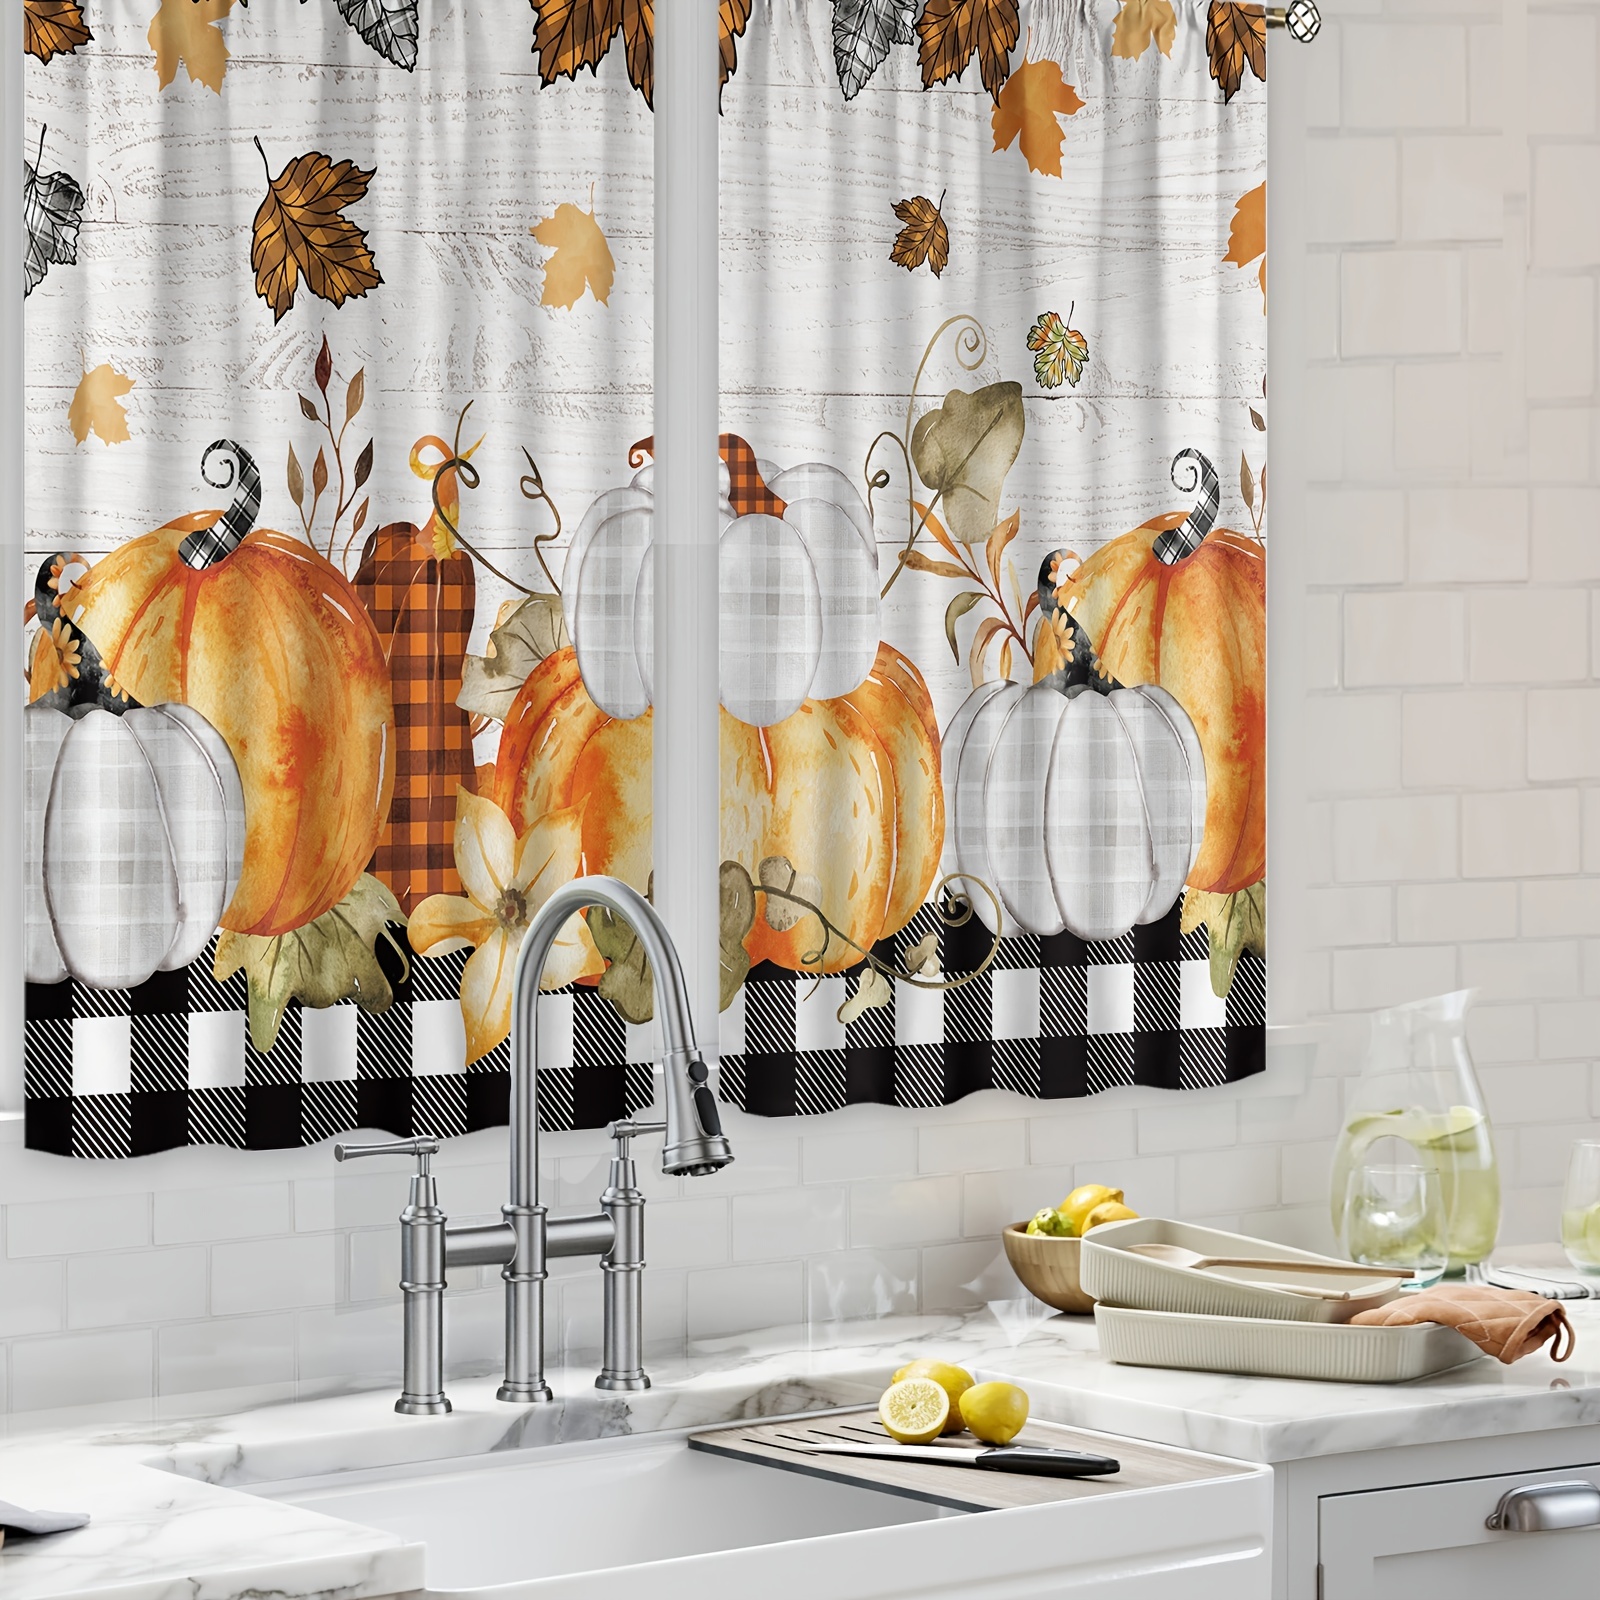 Store cocina  Kitchen window coverings, Kitchen window curtains, Kitchen  curtain designs